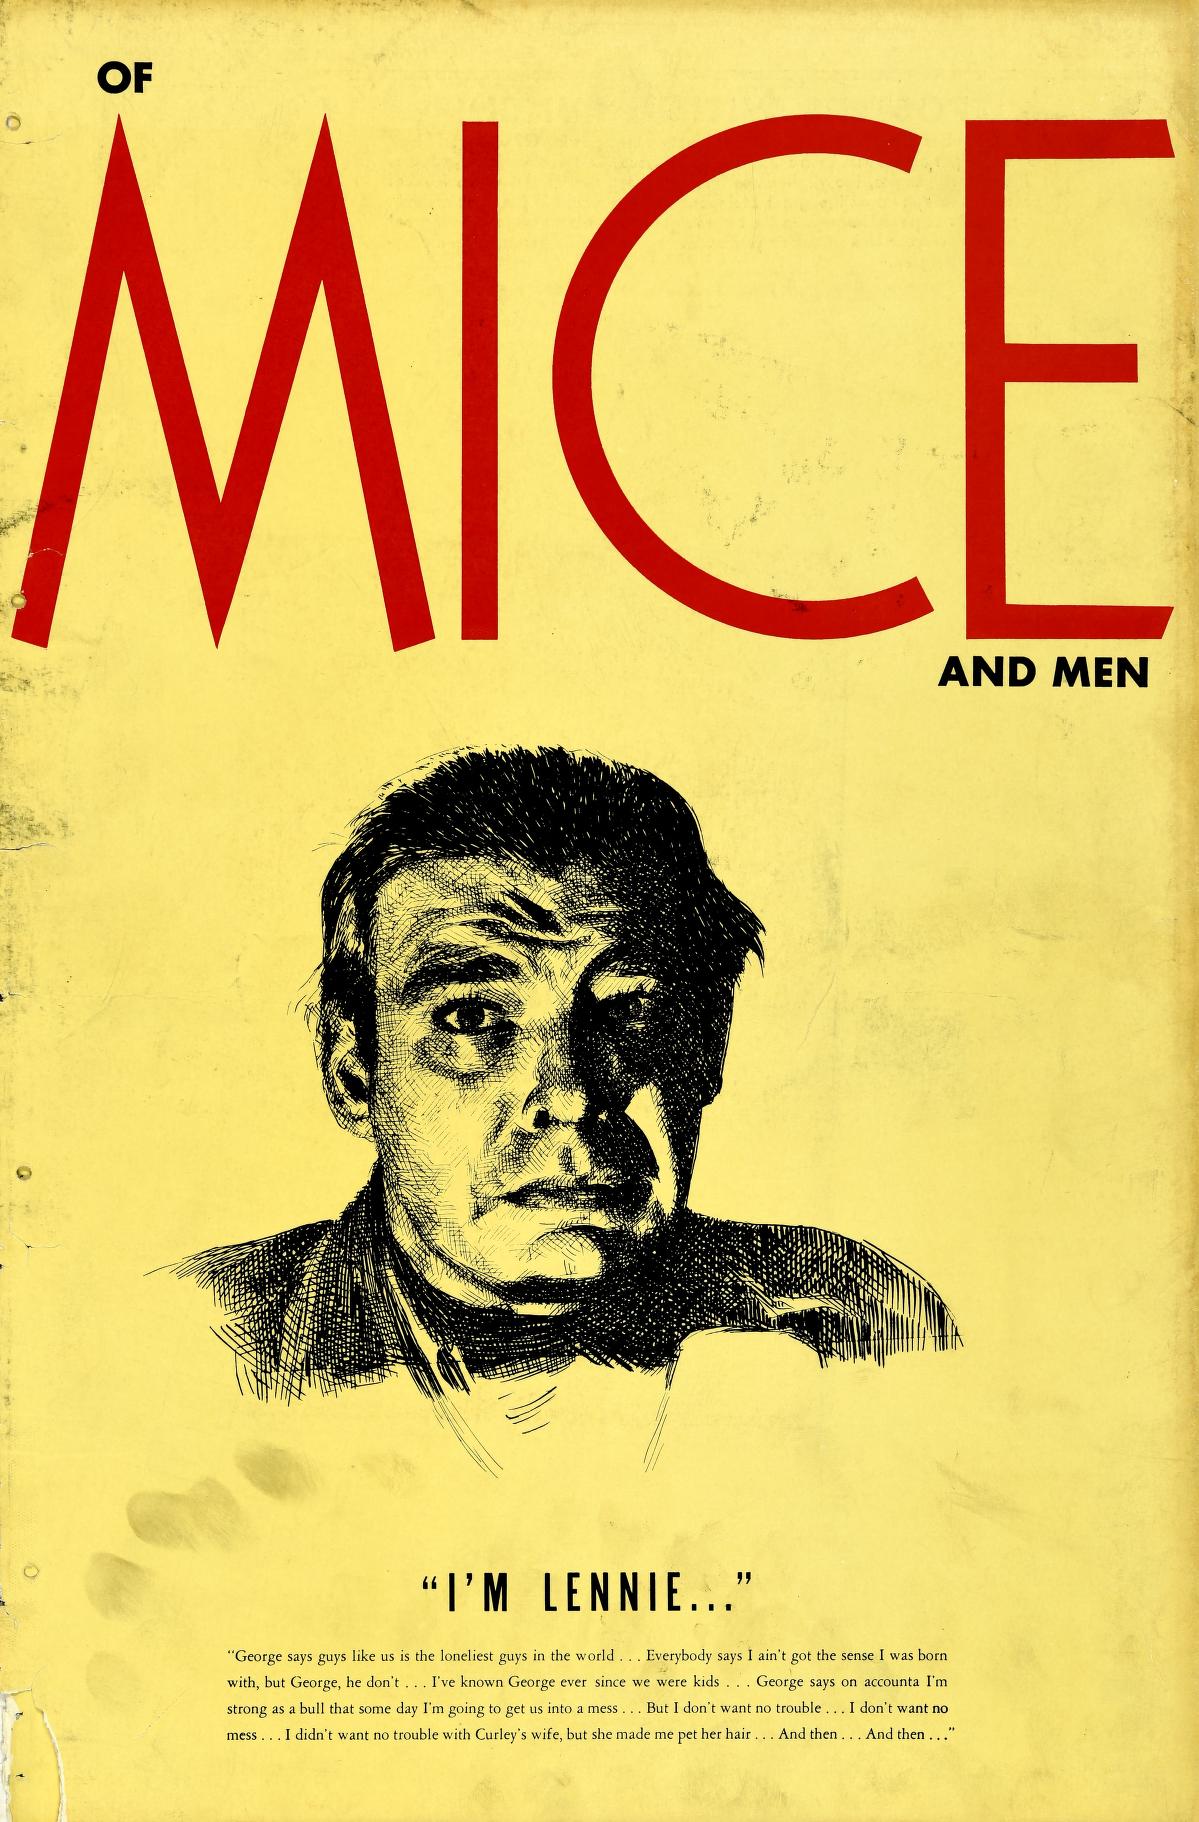 Of Mice and Men (United Artists)